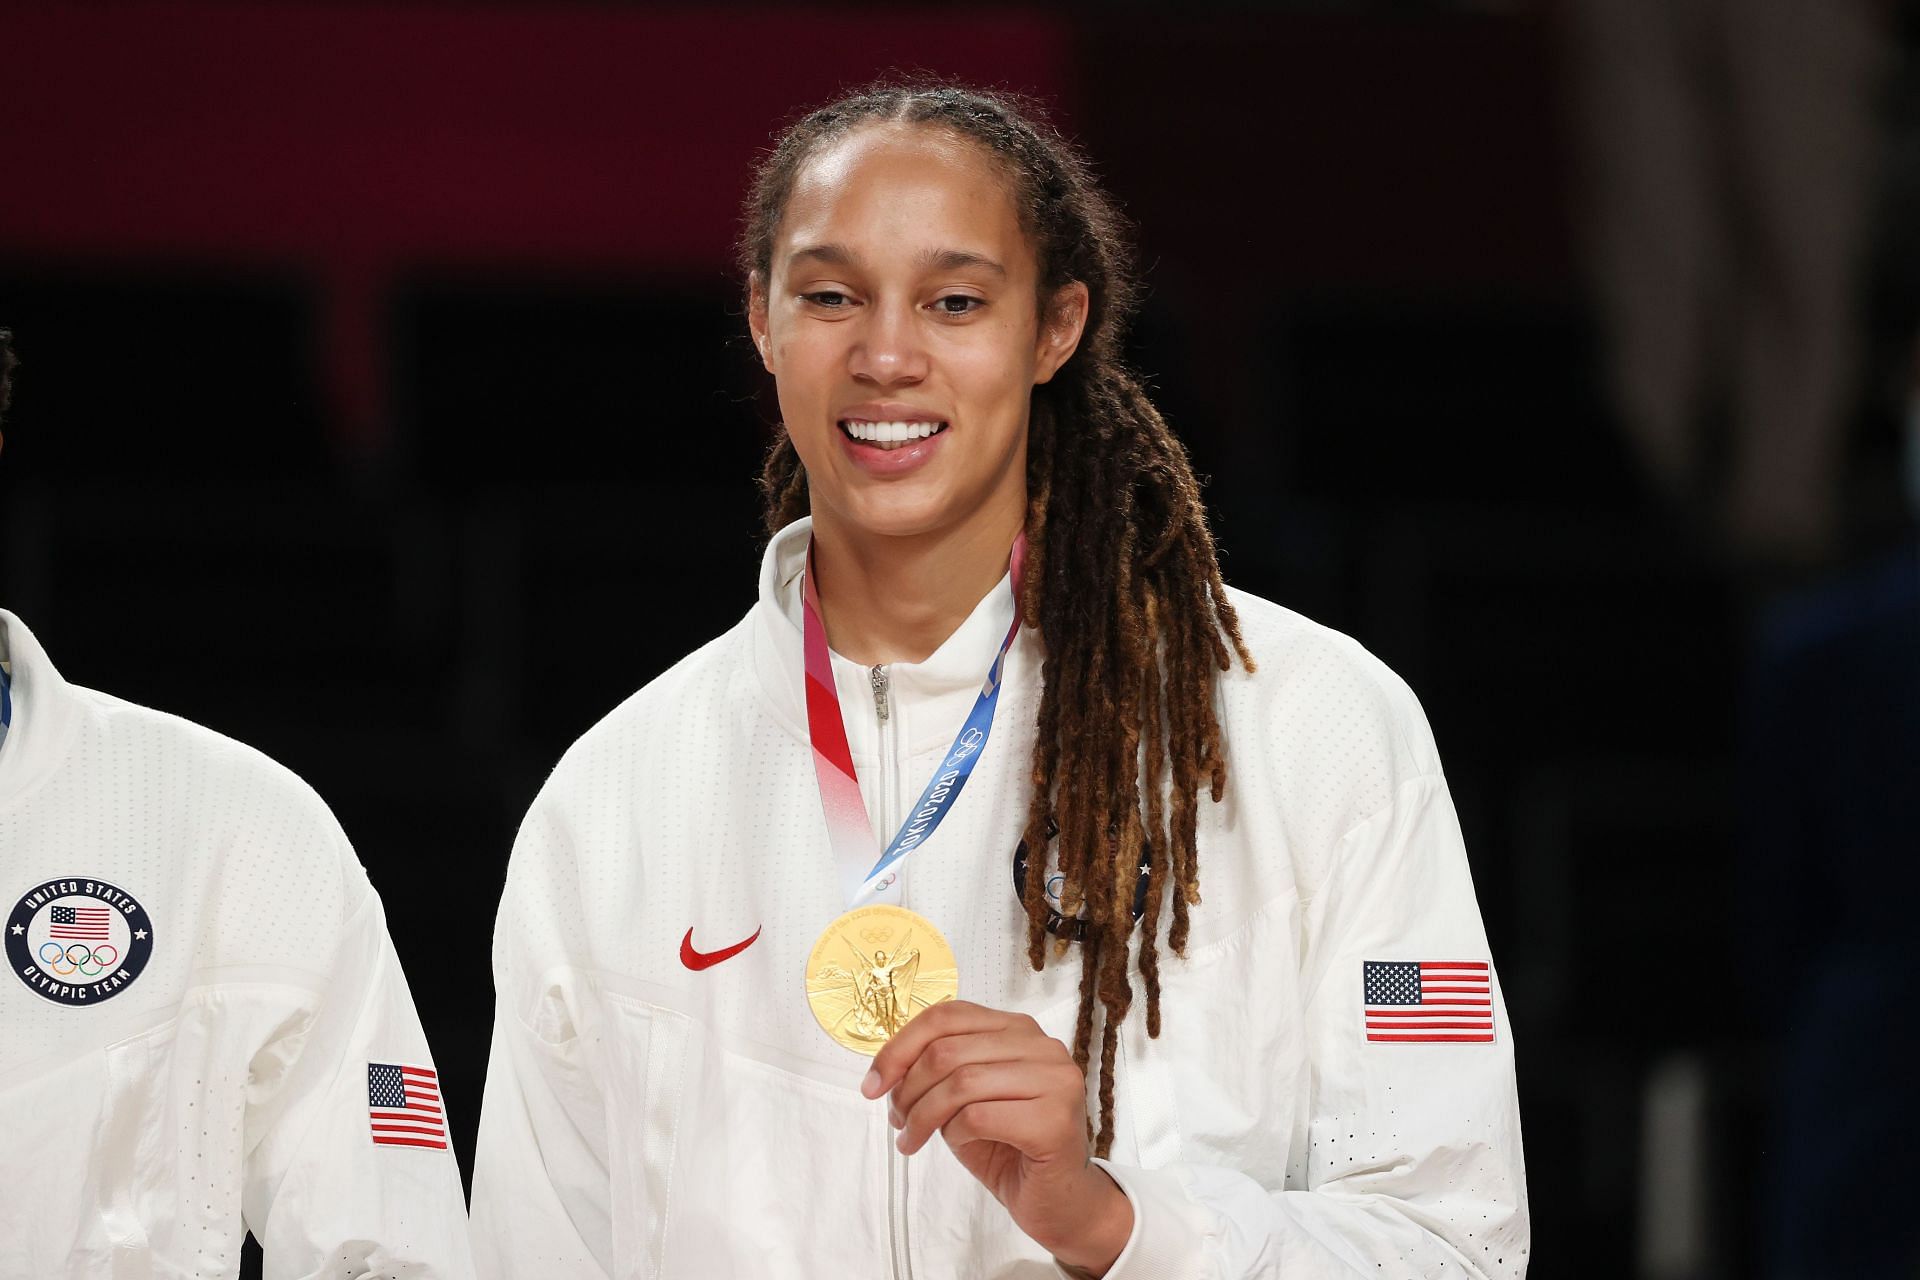 Griner has achieved a lot of success in her basketball career.